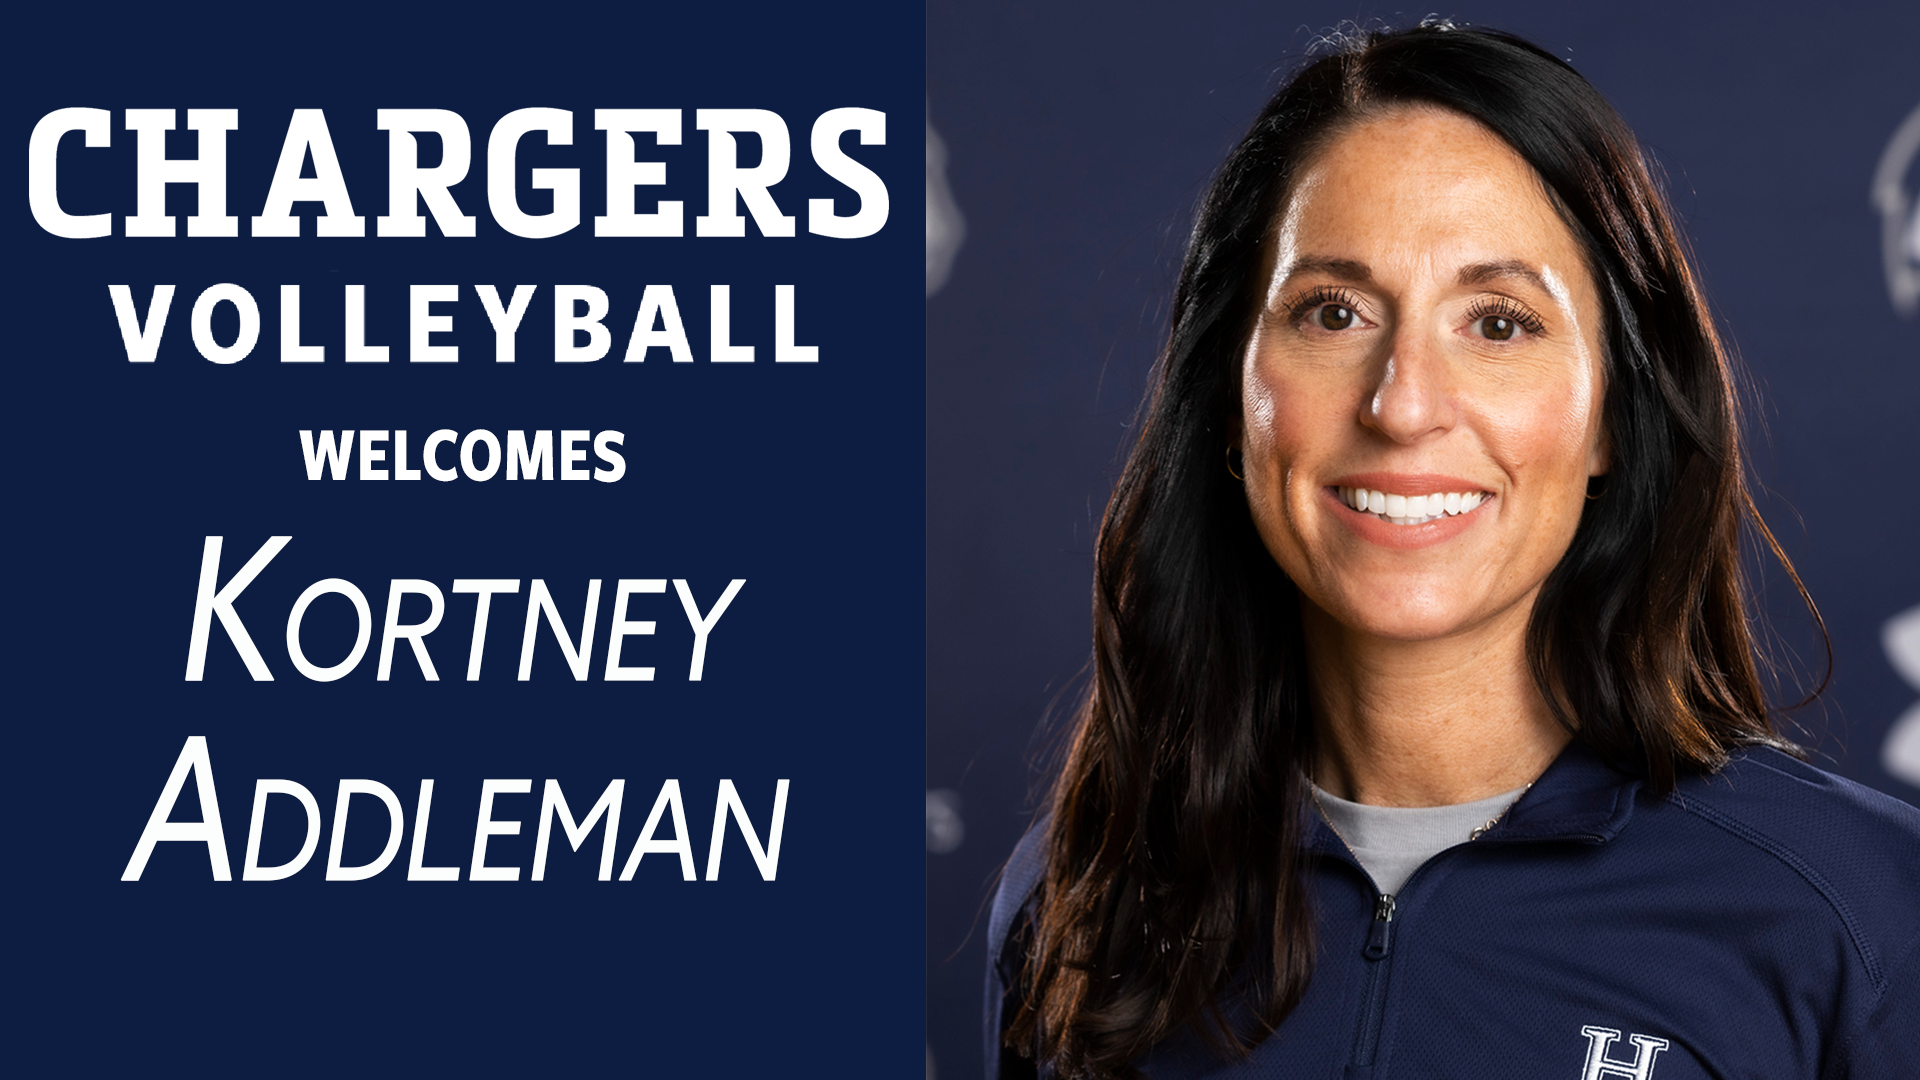 Chargers volleyball team completes coaching staff for 2023 with hire of Kortney Addleman as assistant